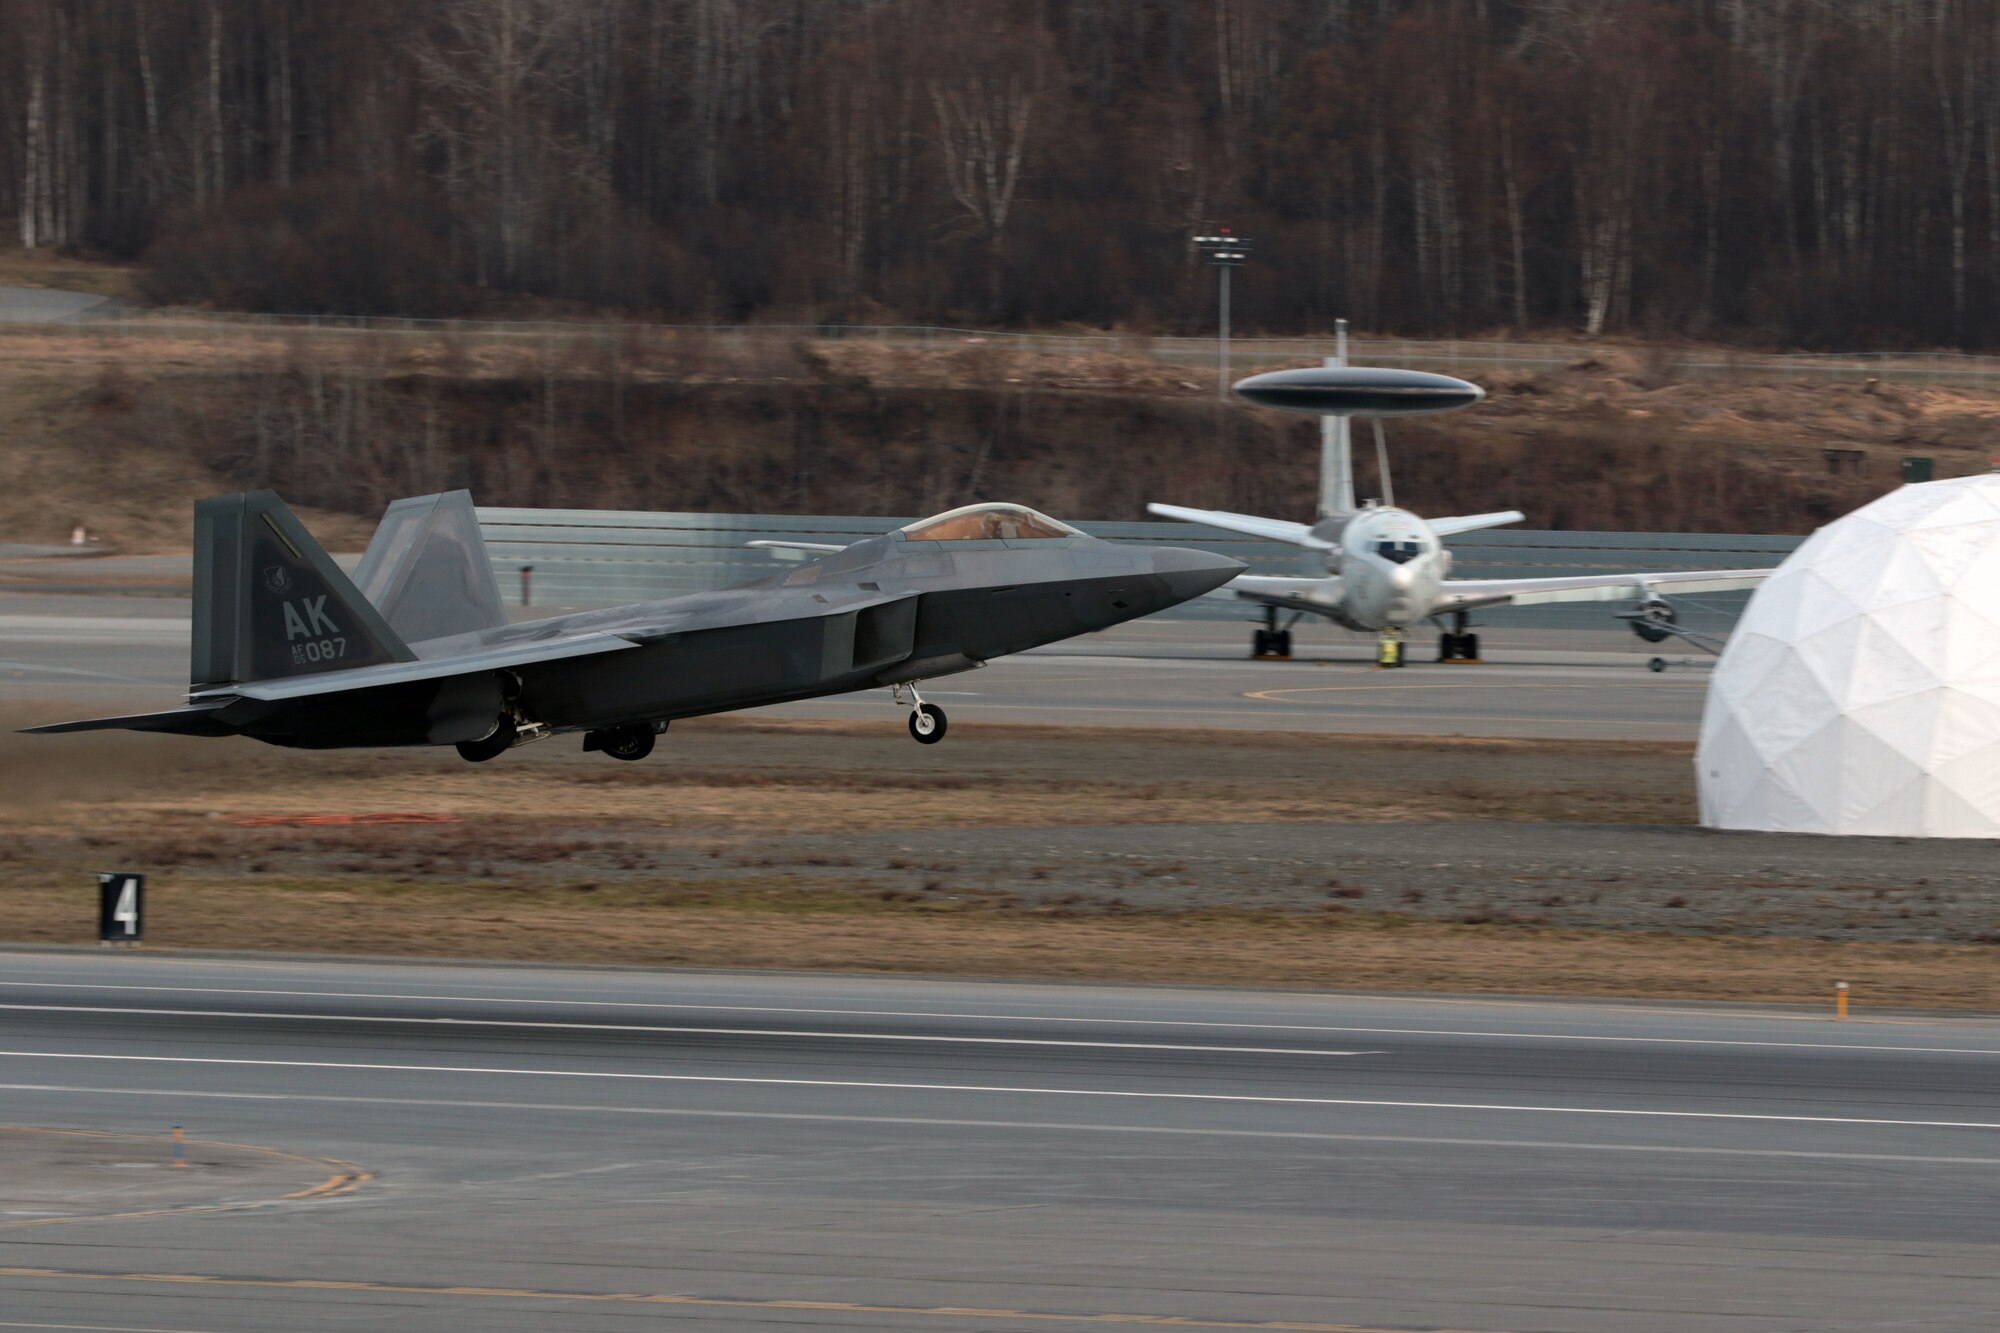 JOINT BASE ELMENDORF-RICHARDSON, Alaska -- An Air Force 3rd Wing F-22 Raptor based here takes off on the first day of Exercise Northern Edge 17. Northern Edge is a biennial joint training exercise involving approximately 6,000 personnel, that dates to 1975.